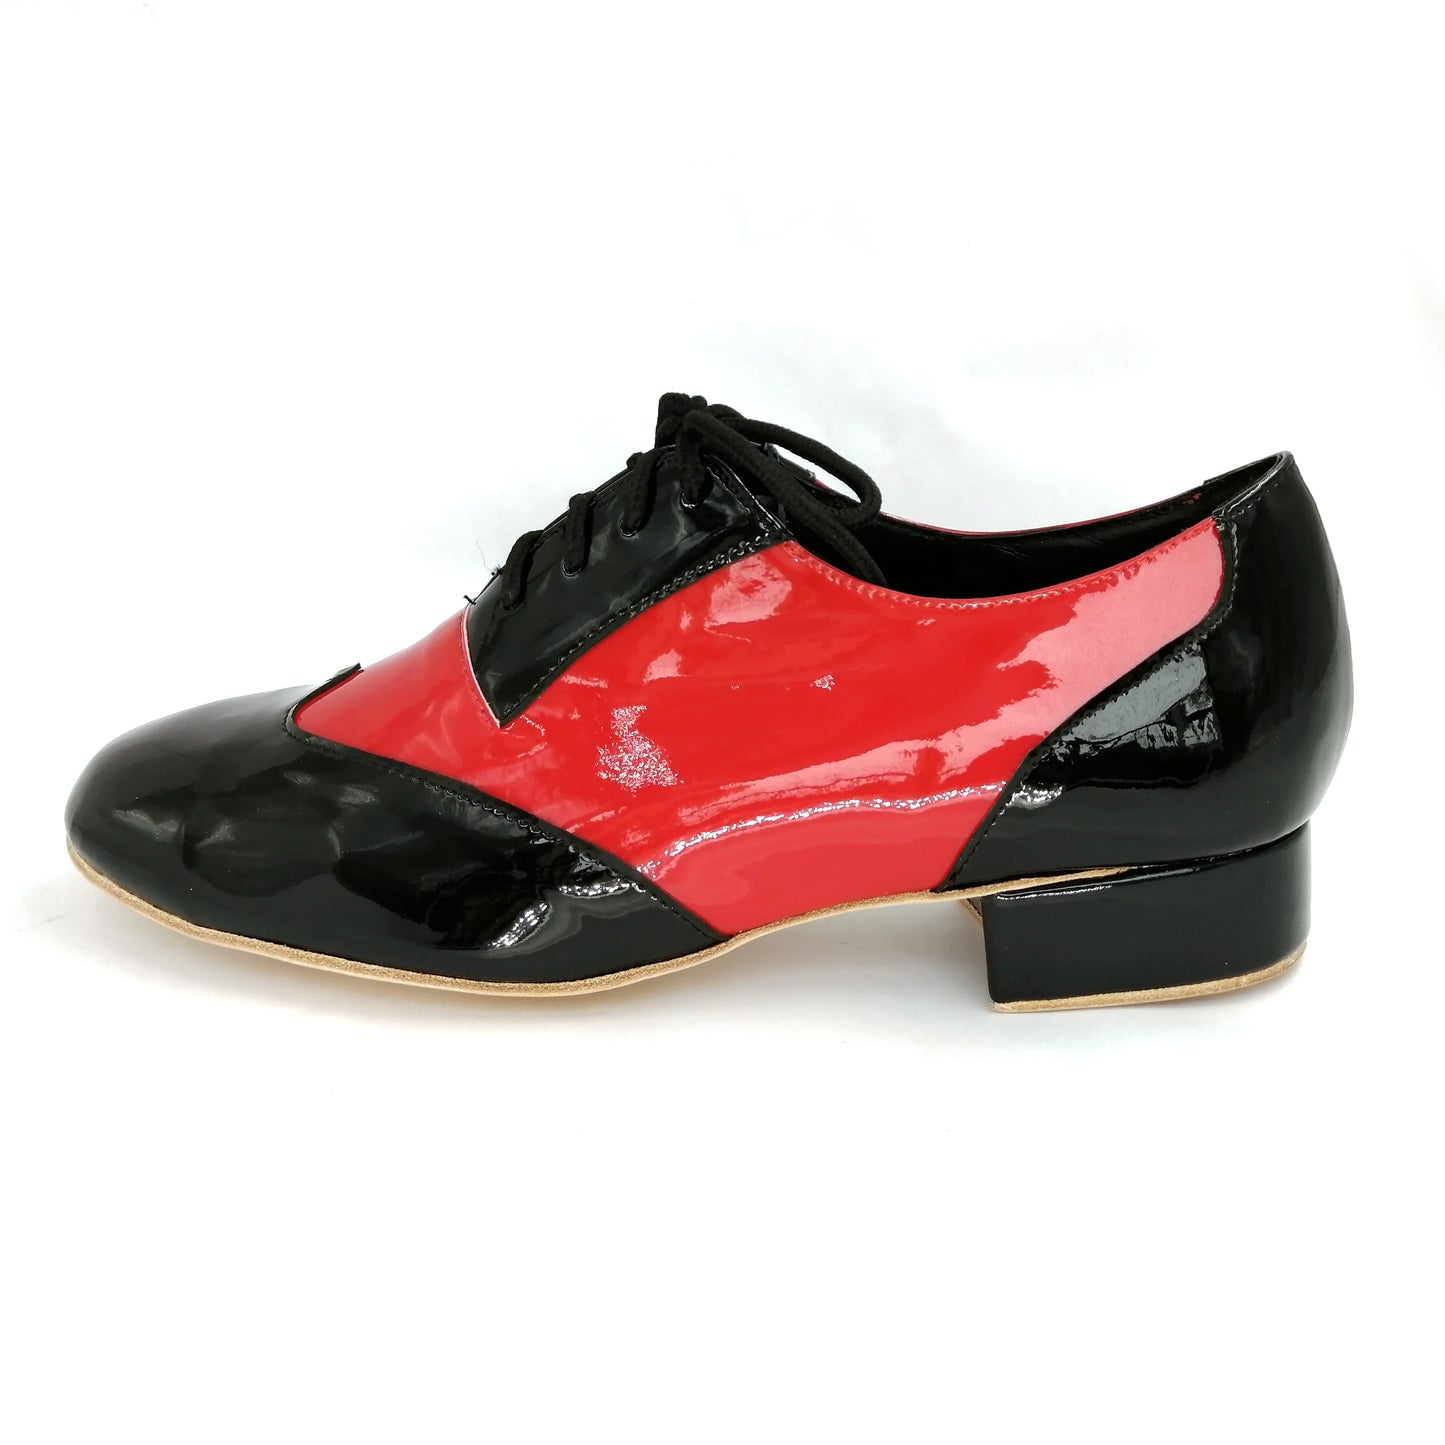 Pro Dancer Men's Tango Shoes Leather Sole 1 inch Heel Lace-up Red and Black (PD-1005A)